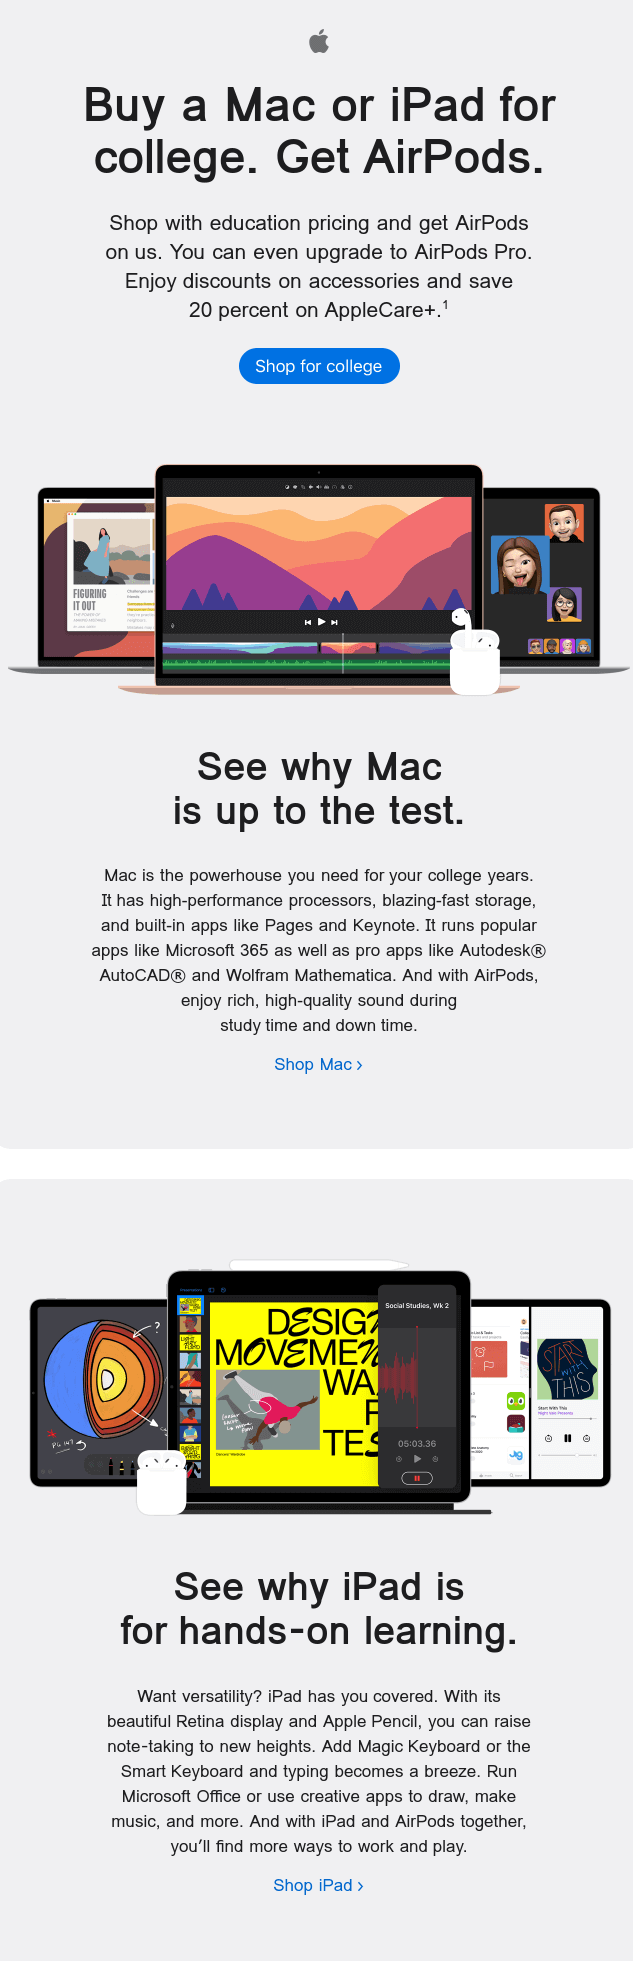 An email from Apple that promotes buying their products for college with a tagline “Mac is the powerhouse you need for college years”